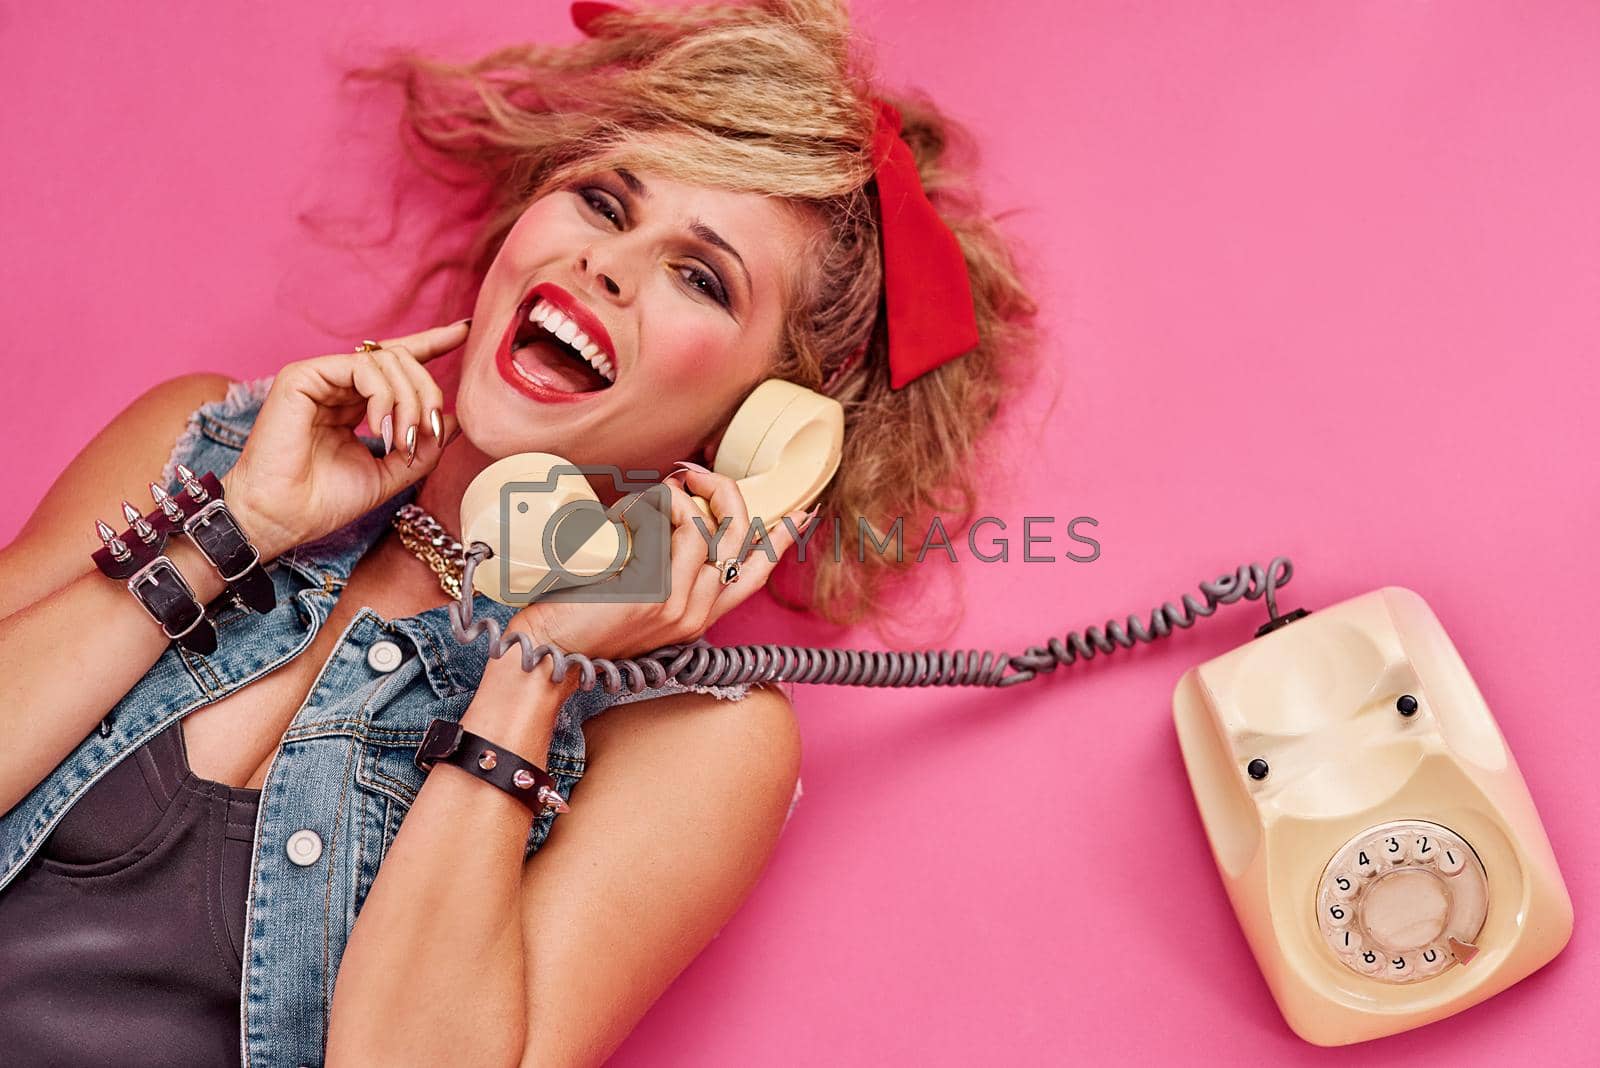 Royalty free image of Everyone had so much fun in the 80s. Studio shot of a young woman holding a telephone while wearing 80s clothing. by YuriArcurs